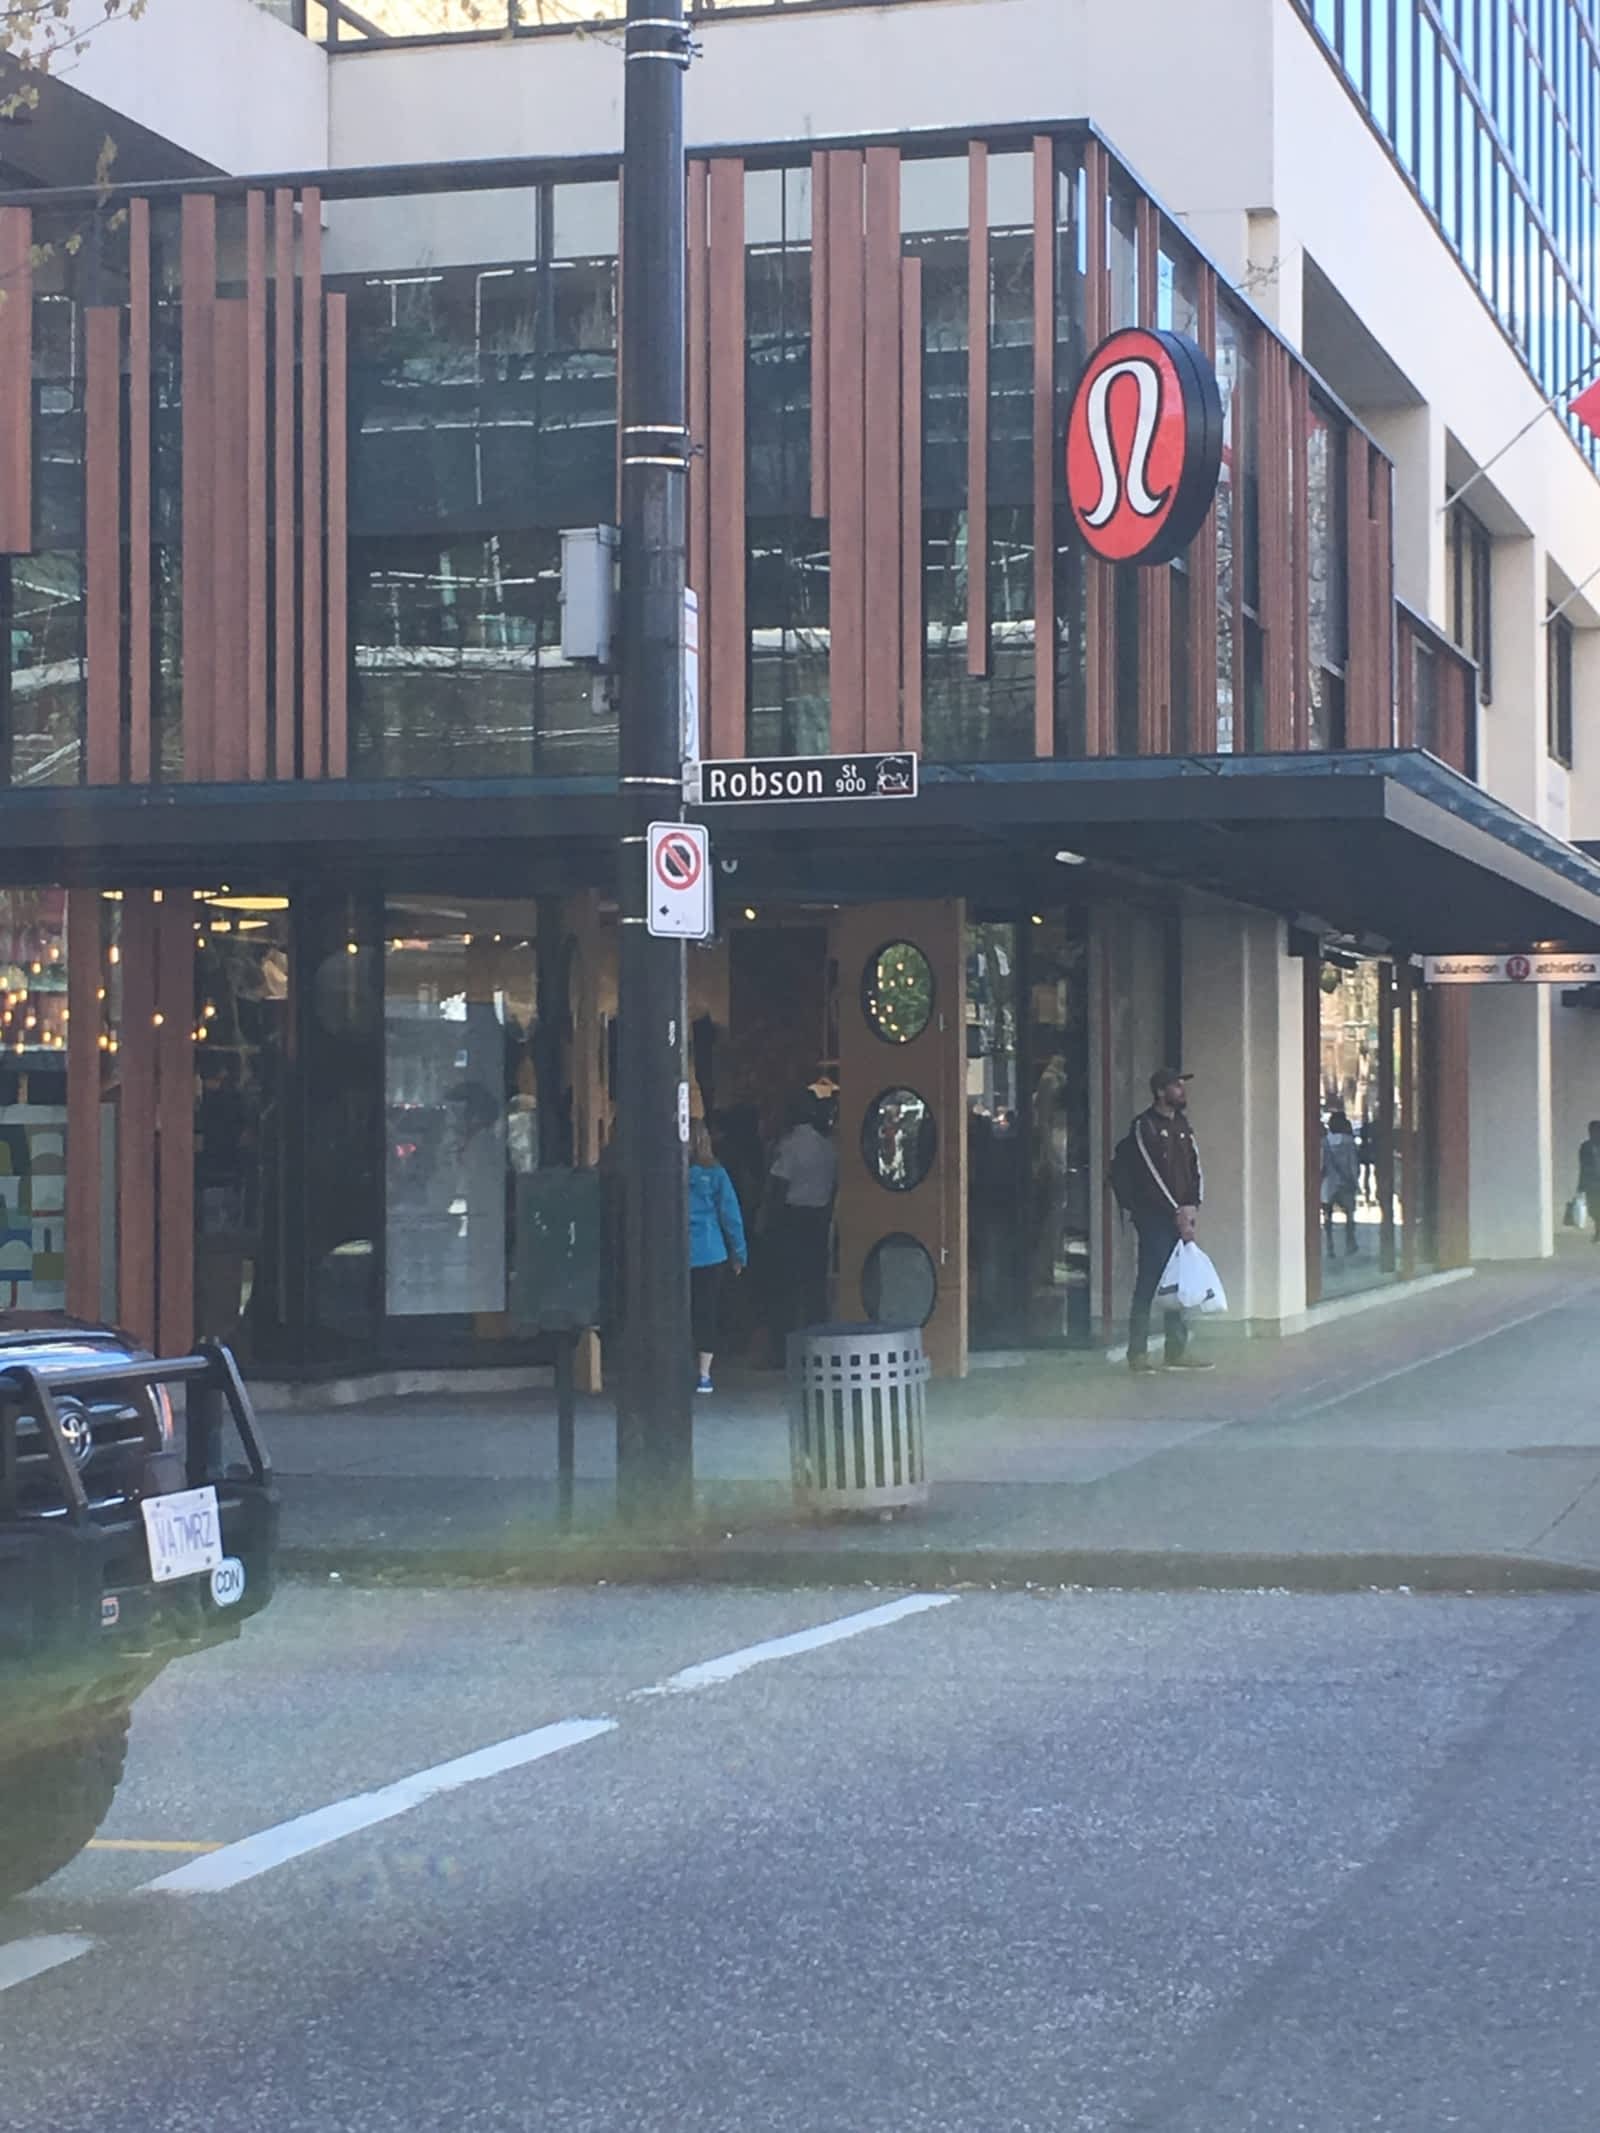 Lululemon warns it might move HQ out of Vancouver